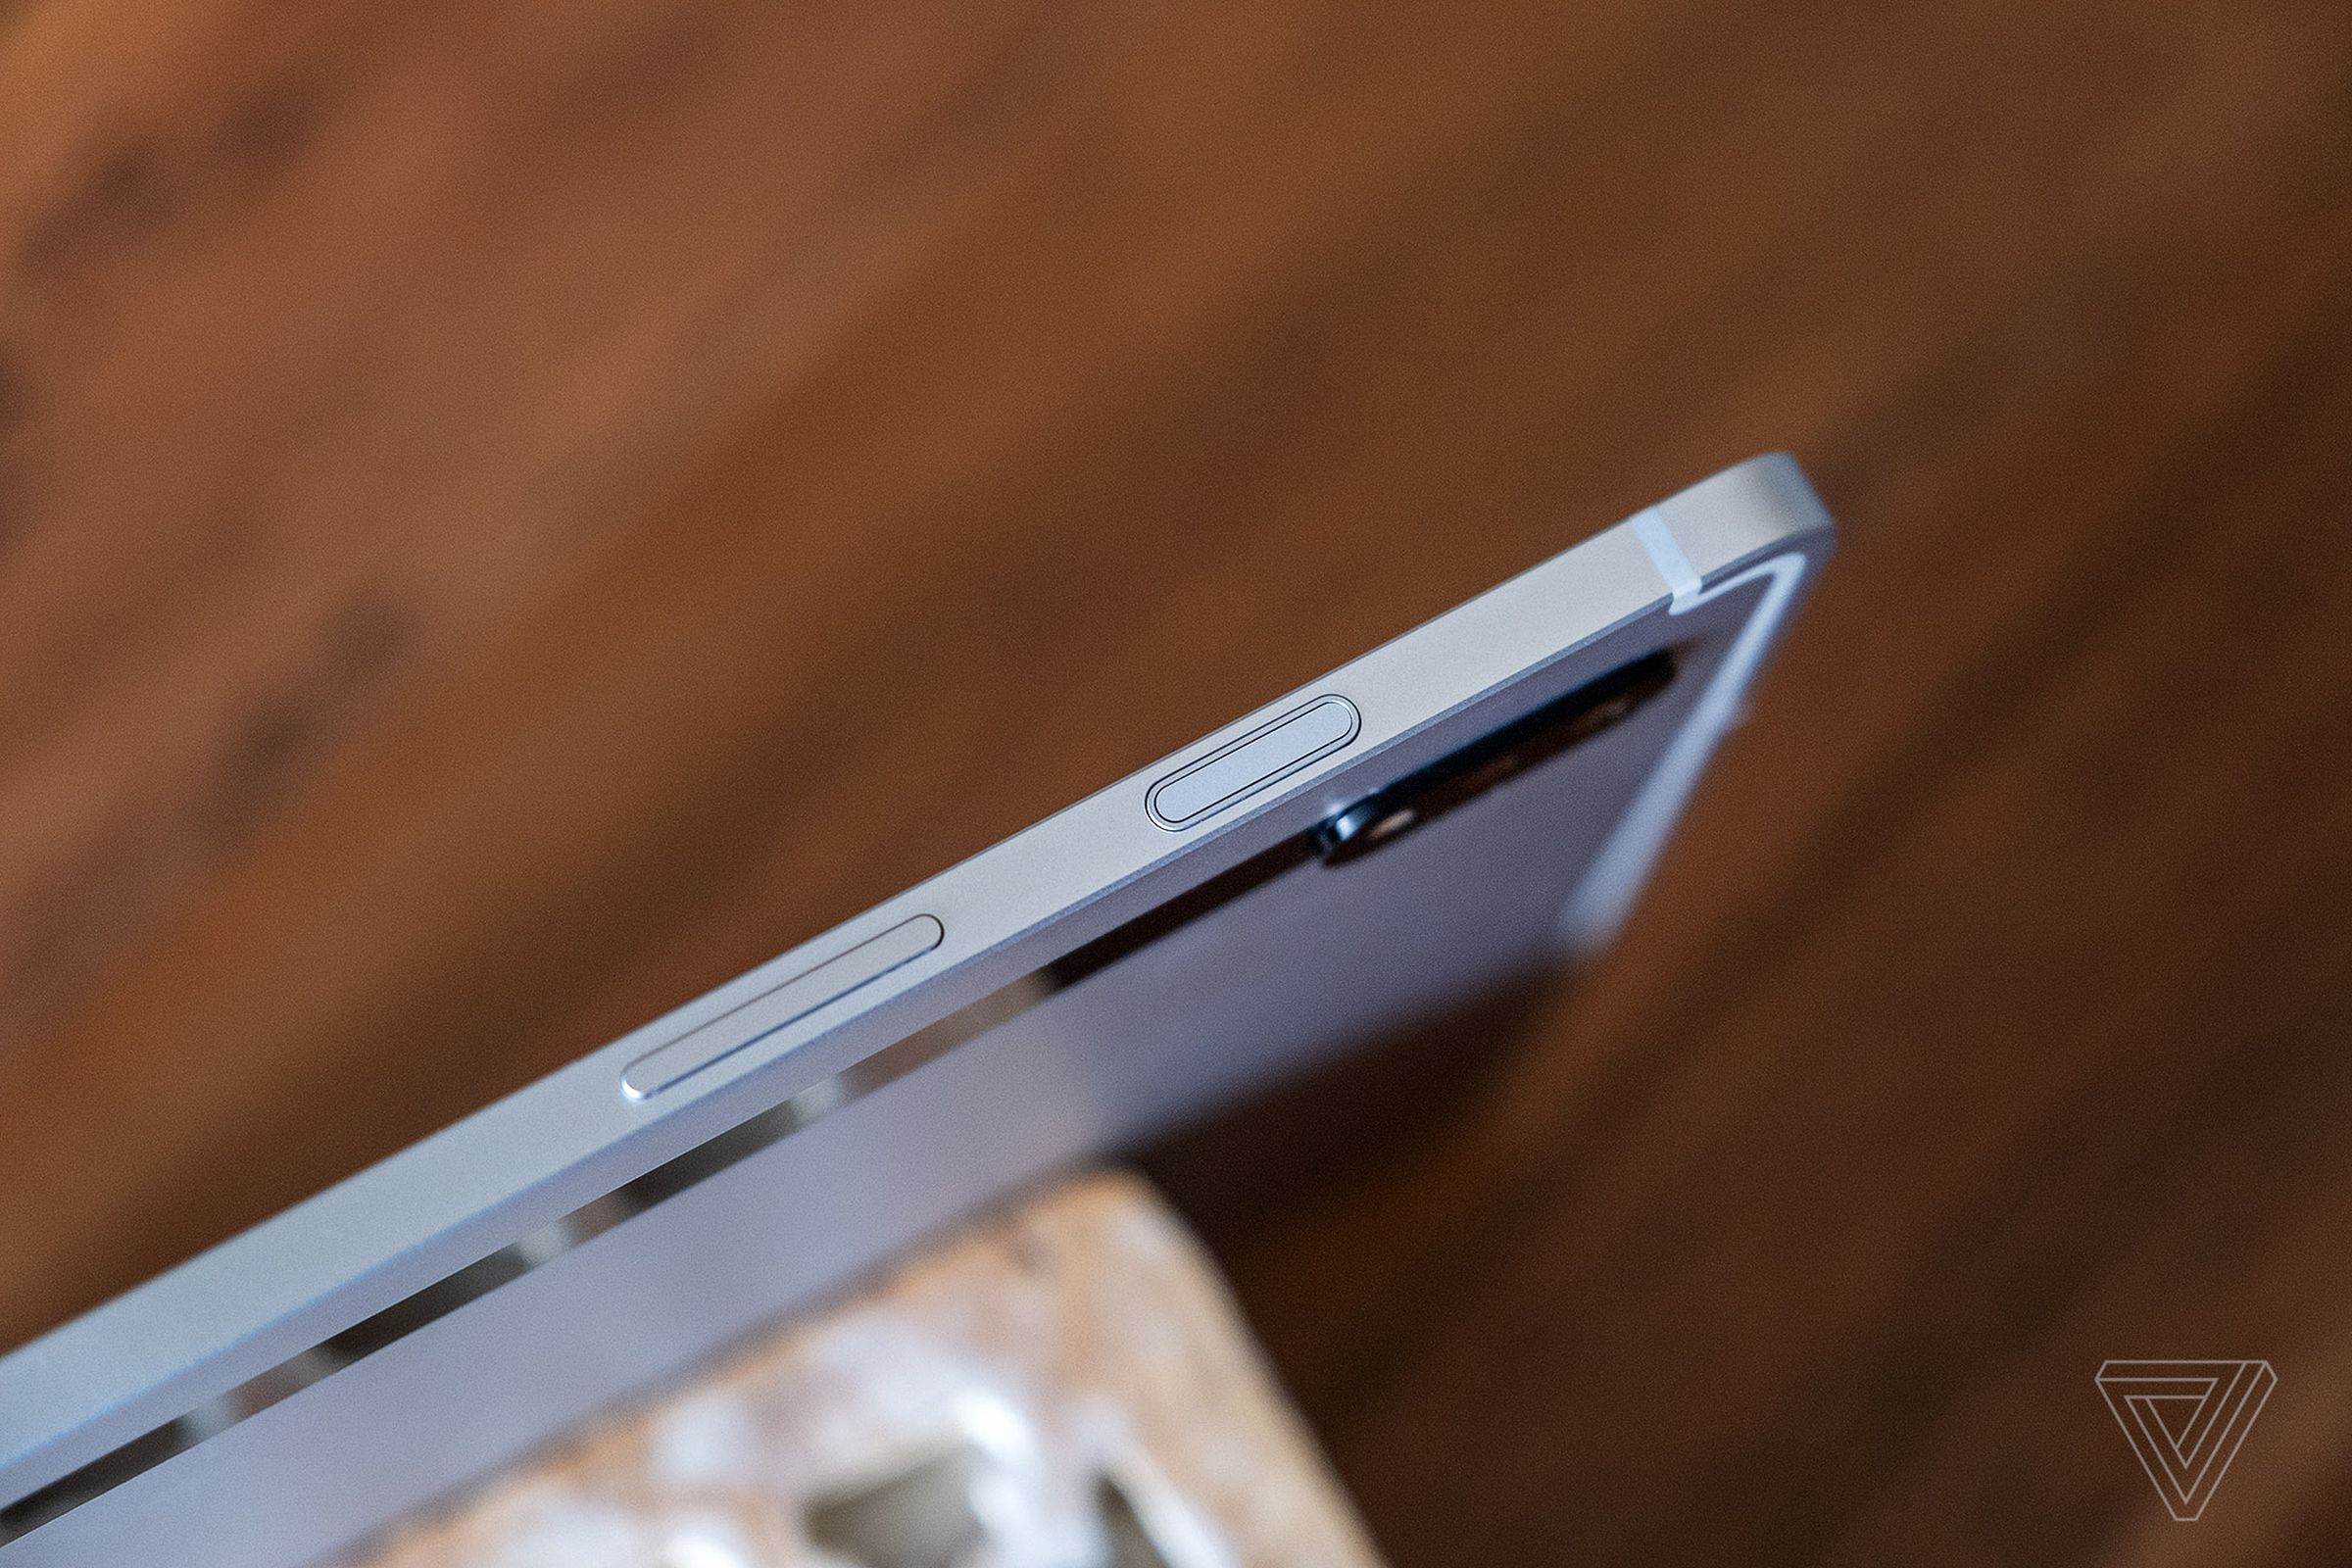 One of the hardware differences between the two models is their biometric system; the Tab S8 Plus has an under-screen fingerprint scanner, while the Tab S8 has a fingerprint scanner embedded in its sleep / wake key, seen here.